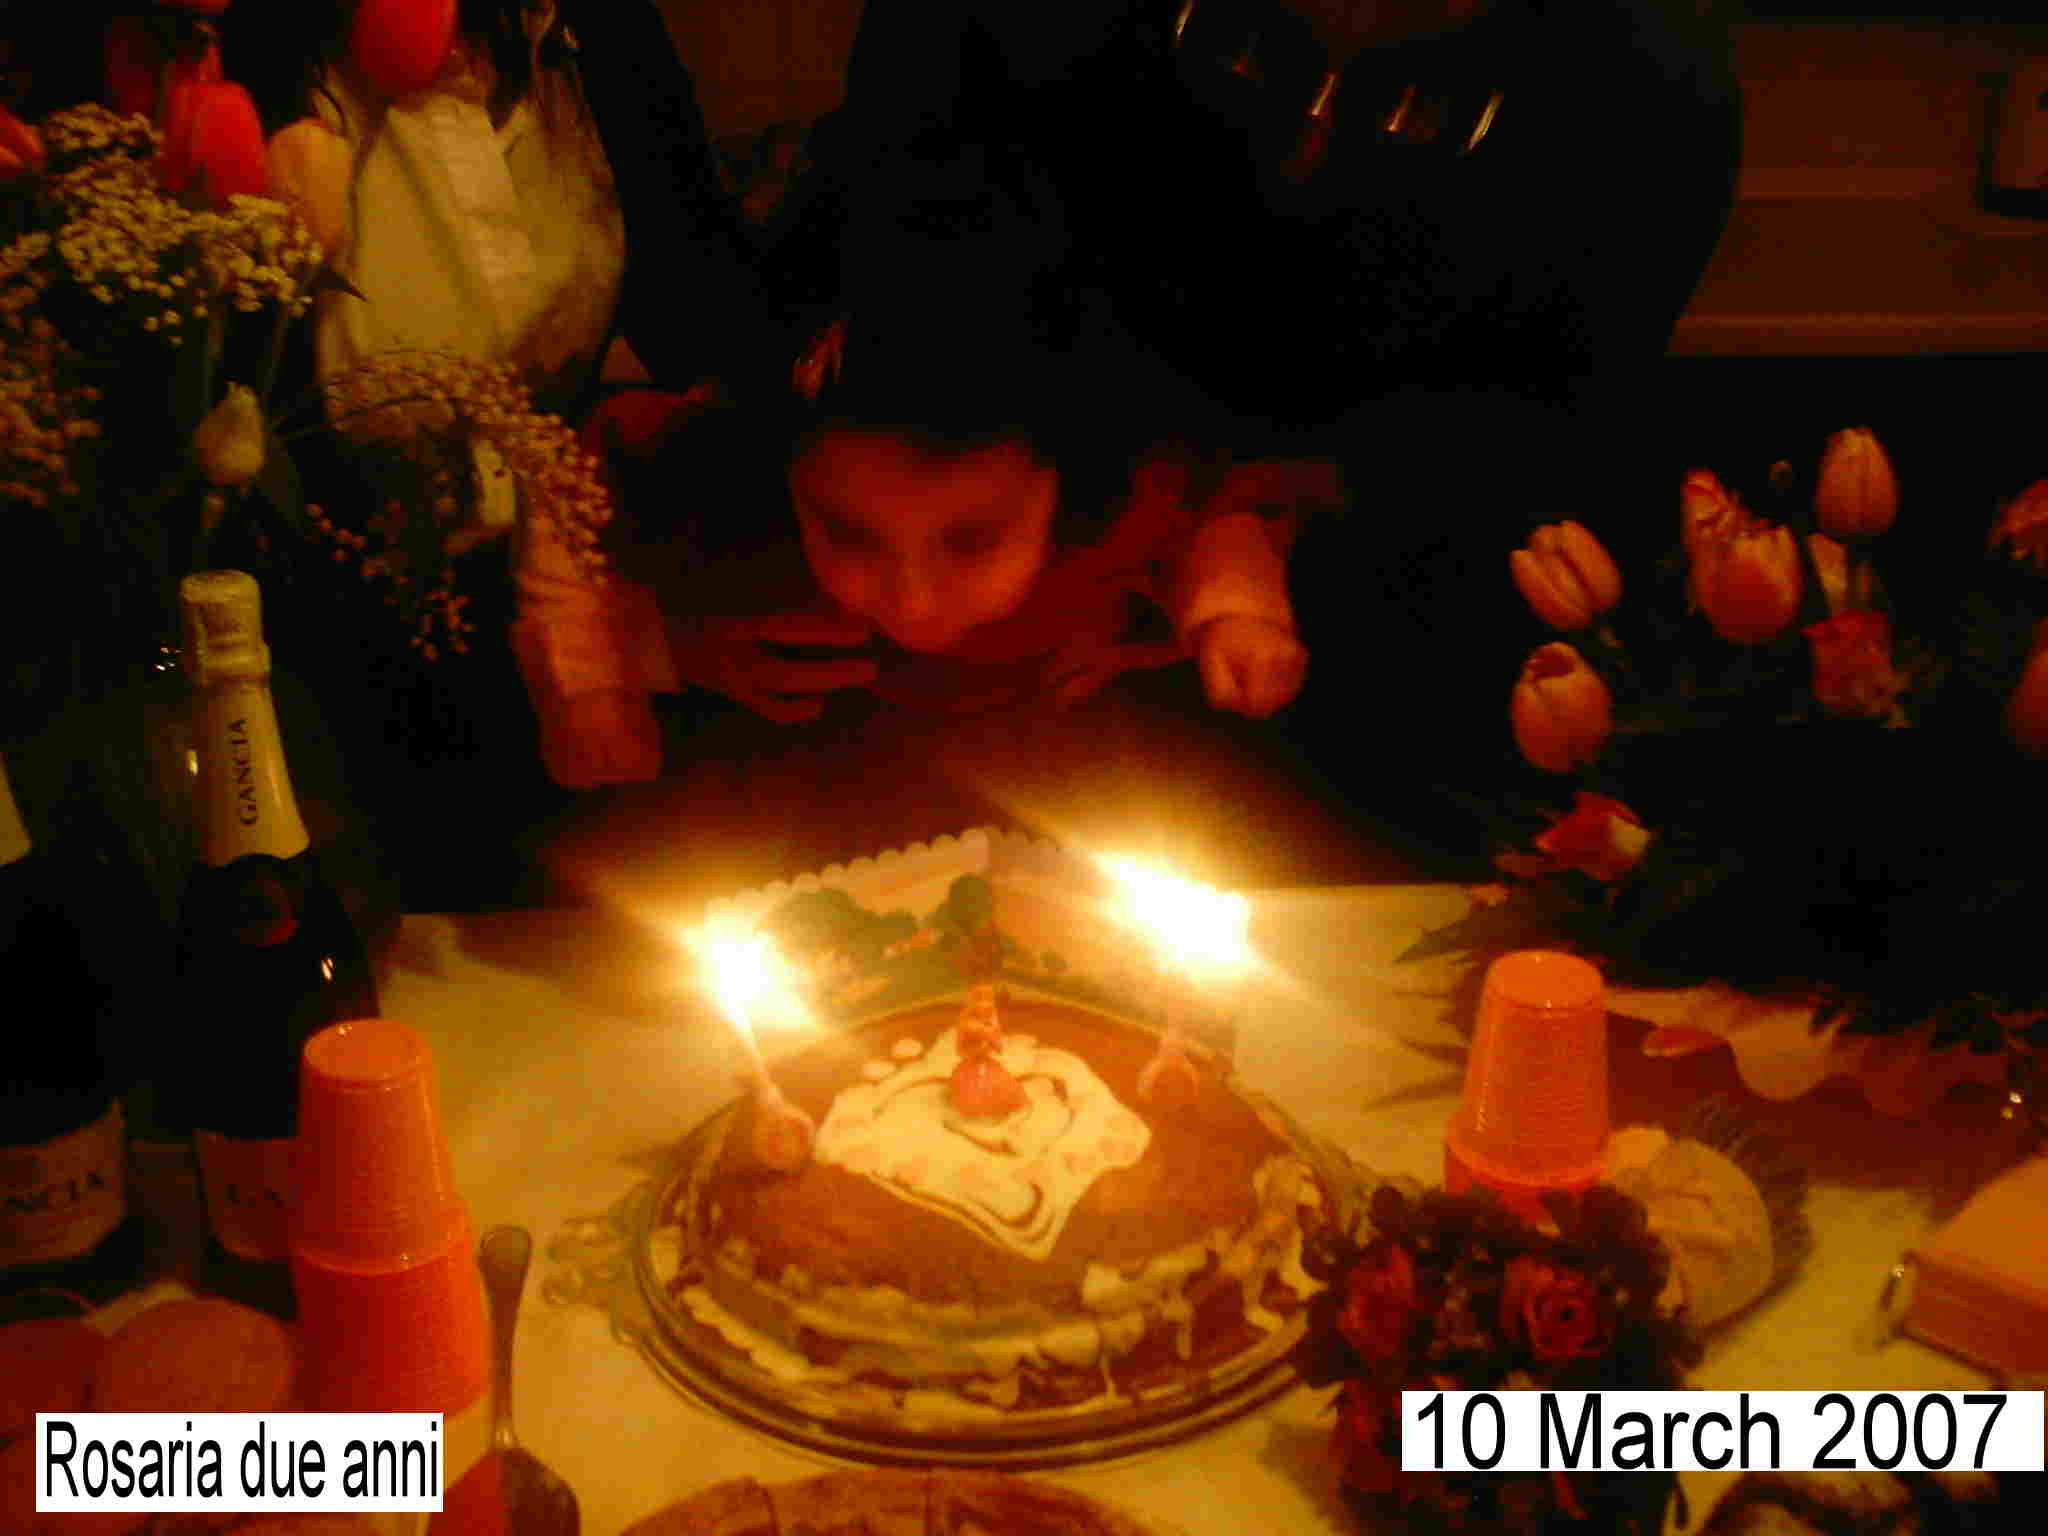 2 years old 10 March 2007